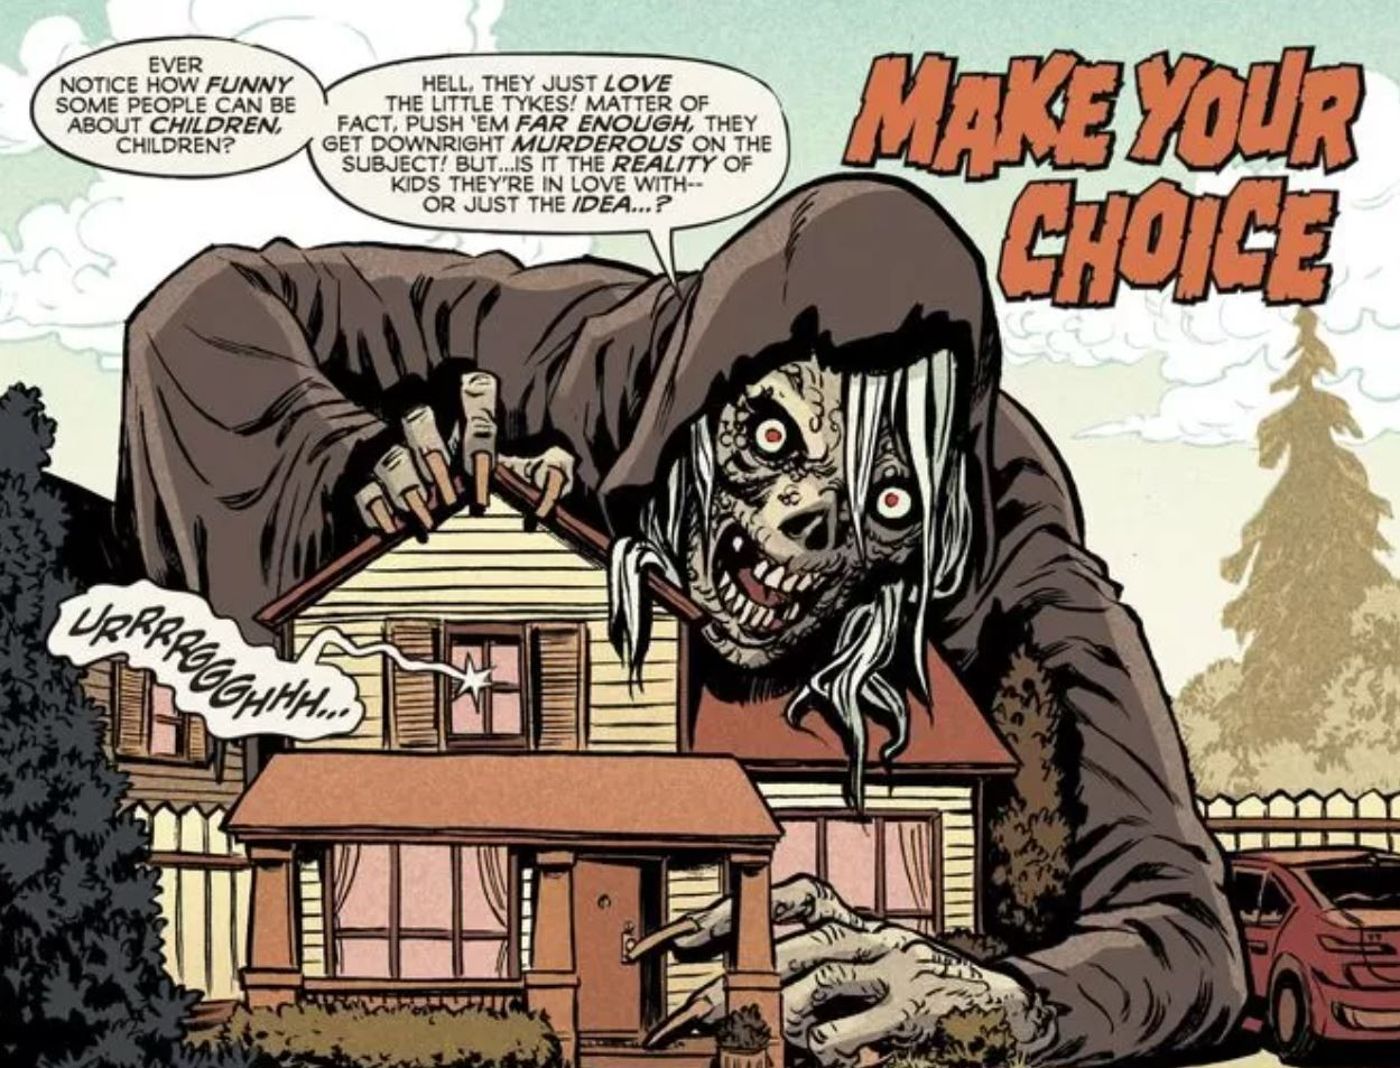 CREEPSHOW Returns with Entertainingly Disturbing New Tales (Review)